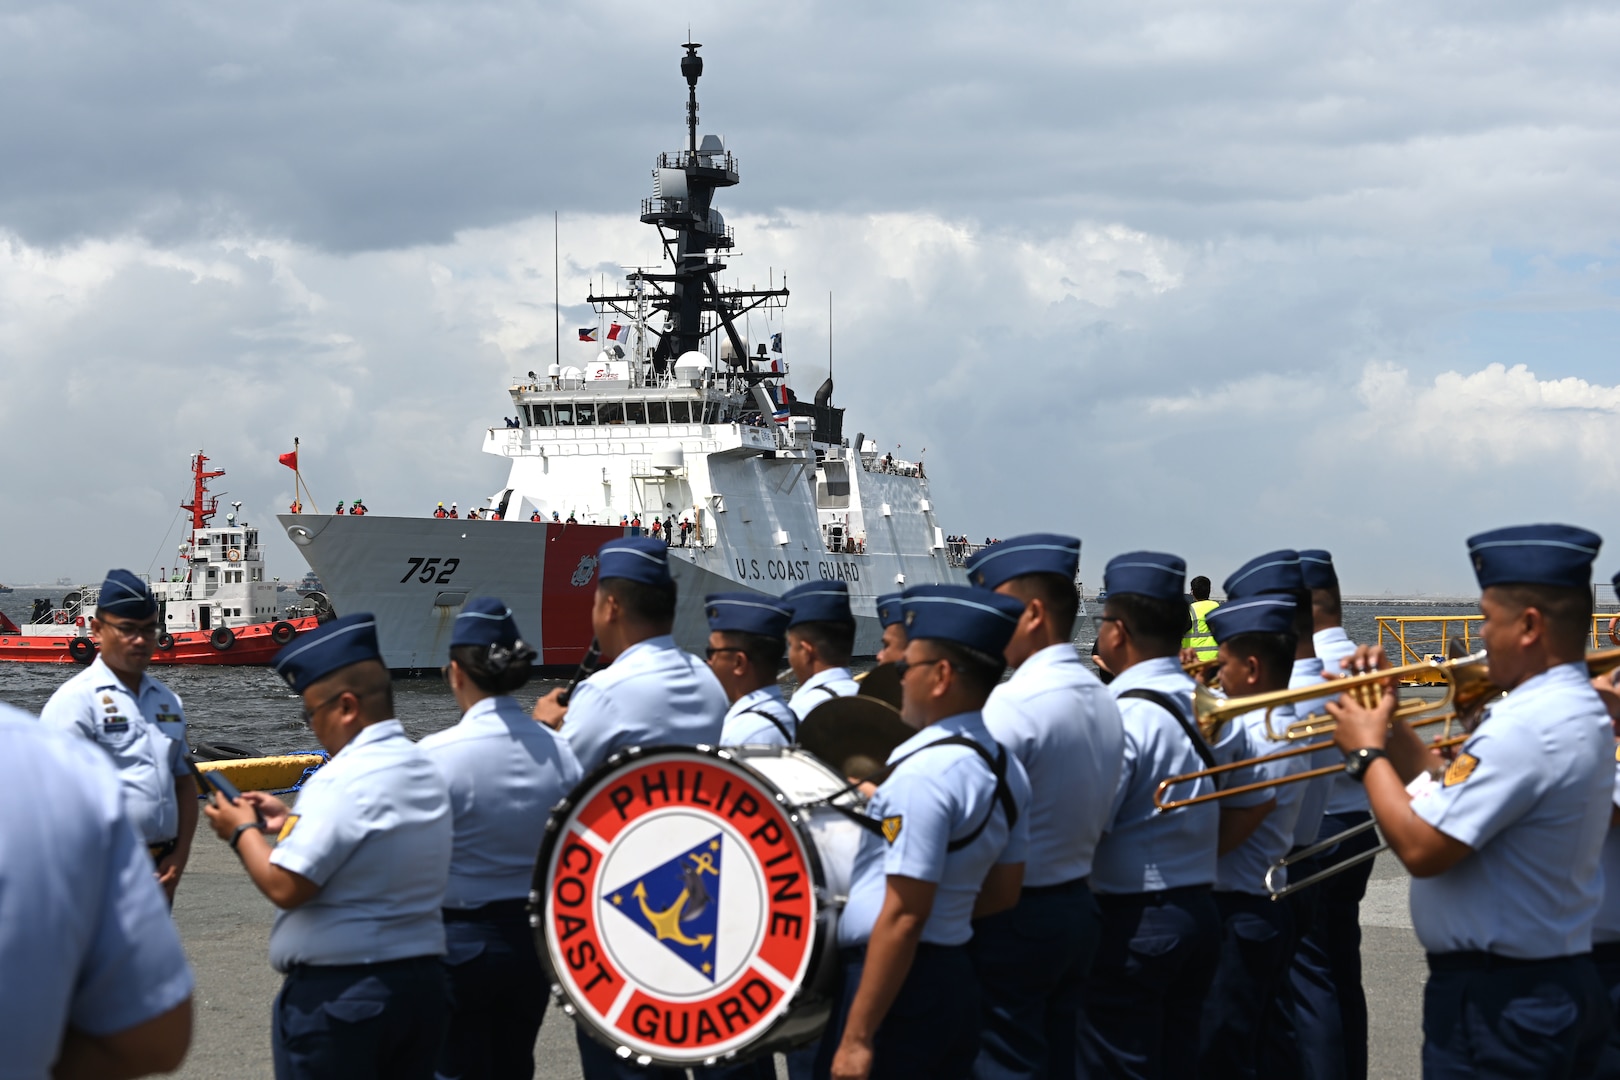 Philippine Coast Guard servicemembers play music as the U.S. Coast Guard Cutter Stratton (WMSL 752) arrives in Manila, Philippines, for a tri-lateral engagement with the Philippine and Japan Coast Guards, June 1, 2023. Stratton deployed to the Western Pacific under U.S. Navy 7th Fleet command to serve as a non-escalatory asset for the promotion of a rules-based order in the maritime domain by engaging with partner nations and allies in the region. (U.S. Coast Guard photo by Chief Petty Officer Matt Masaschi)